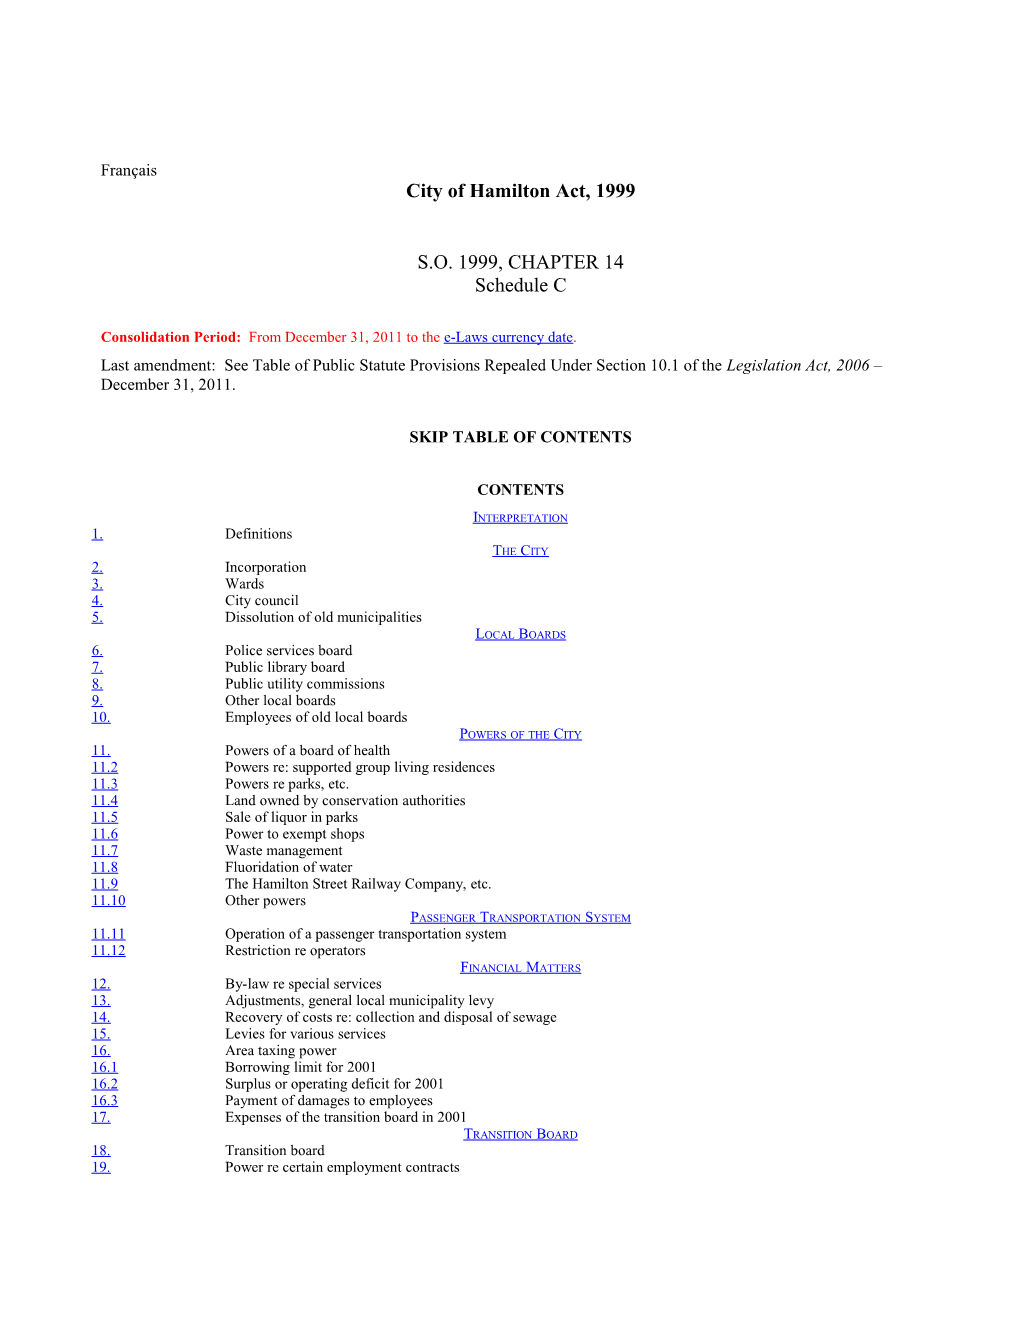 City of Hamilton Act, 1999, S.O. 1999, C. 14, Sched. C